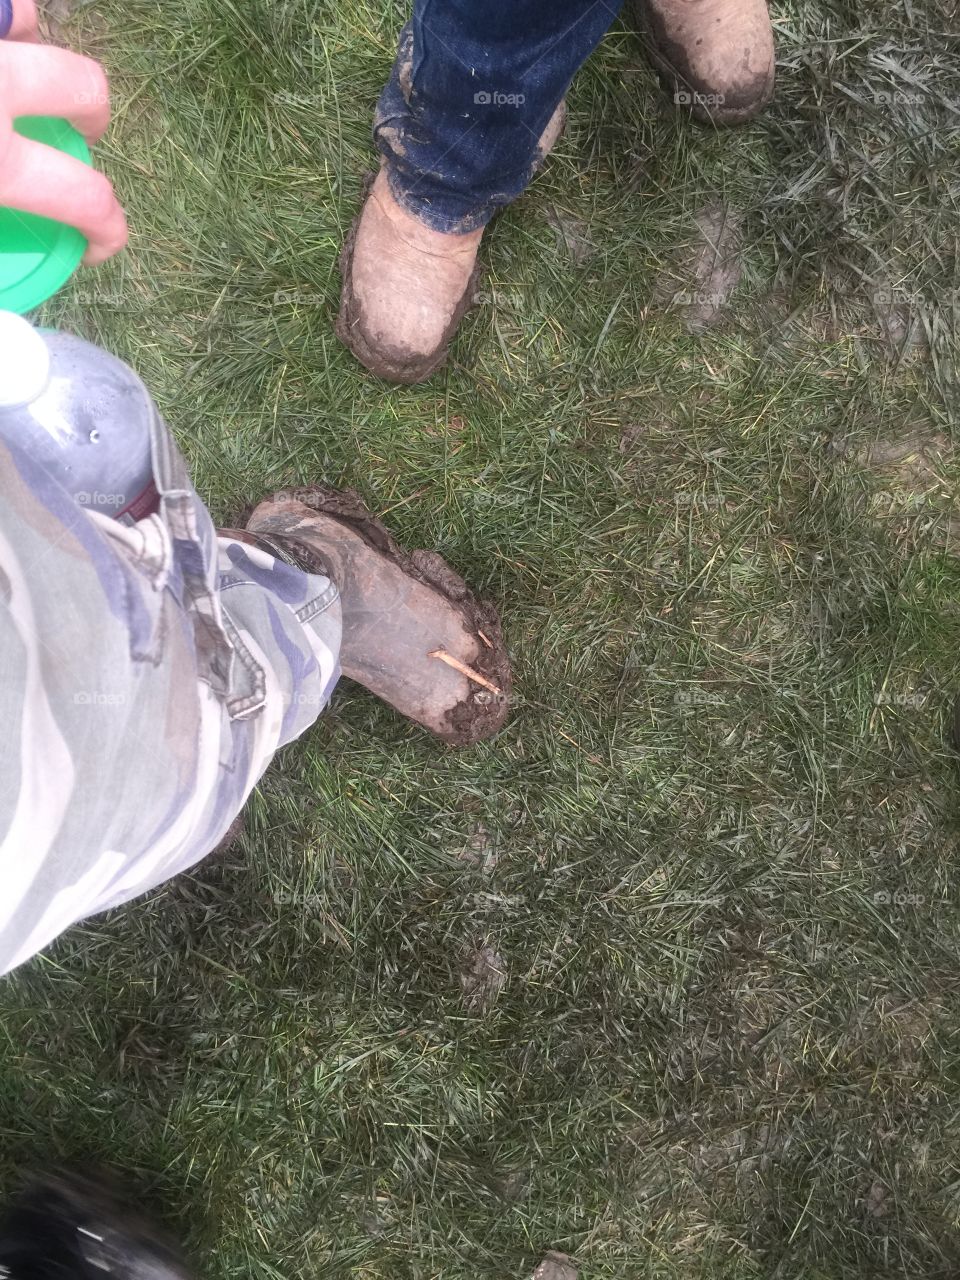 Enjoying 2015 KC Rockfest in my Muck boots. These are my all-around, go-to boots any time it's muddy (or mucky) outside!  They are great to work in and play in. They've gone to all day rock concerts, rainy hiking trips, Thanksgiving camping trips, fishing trips, you name it!  